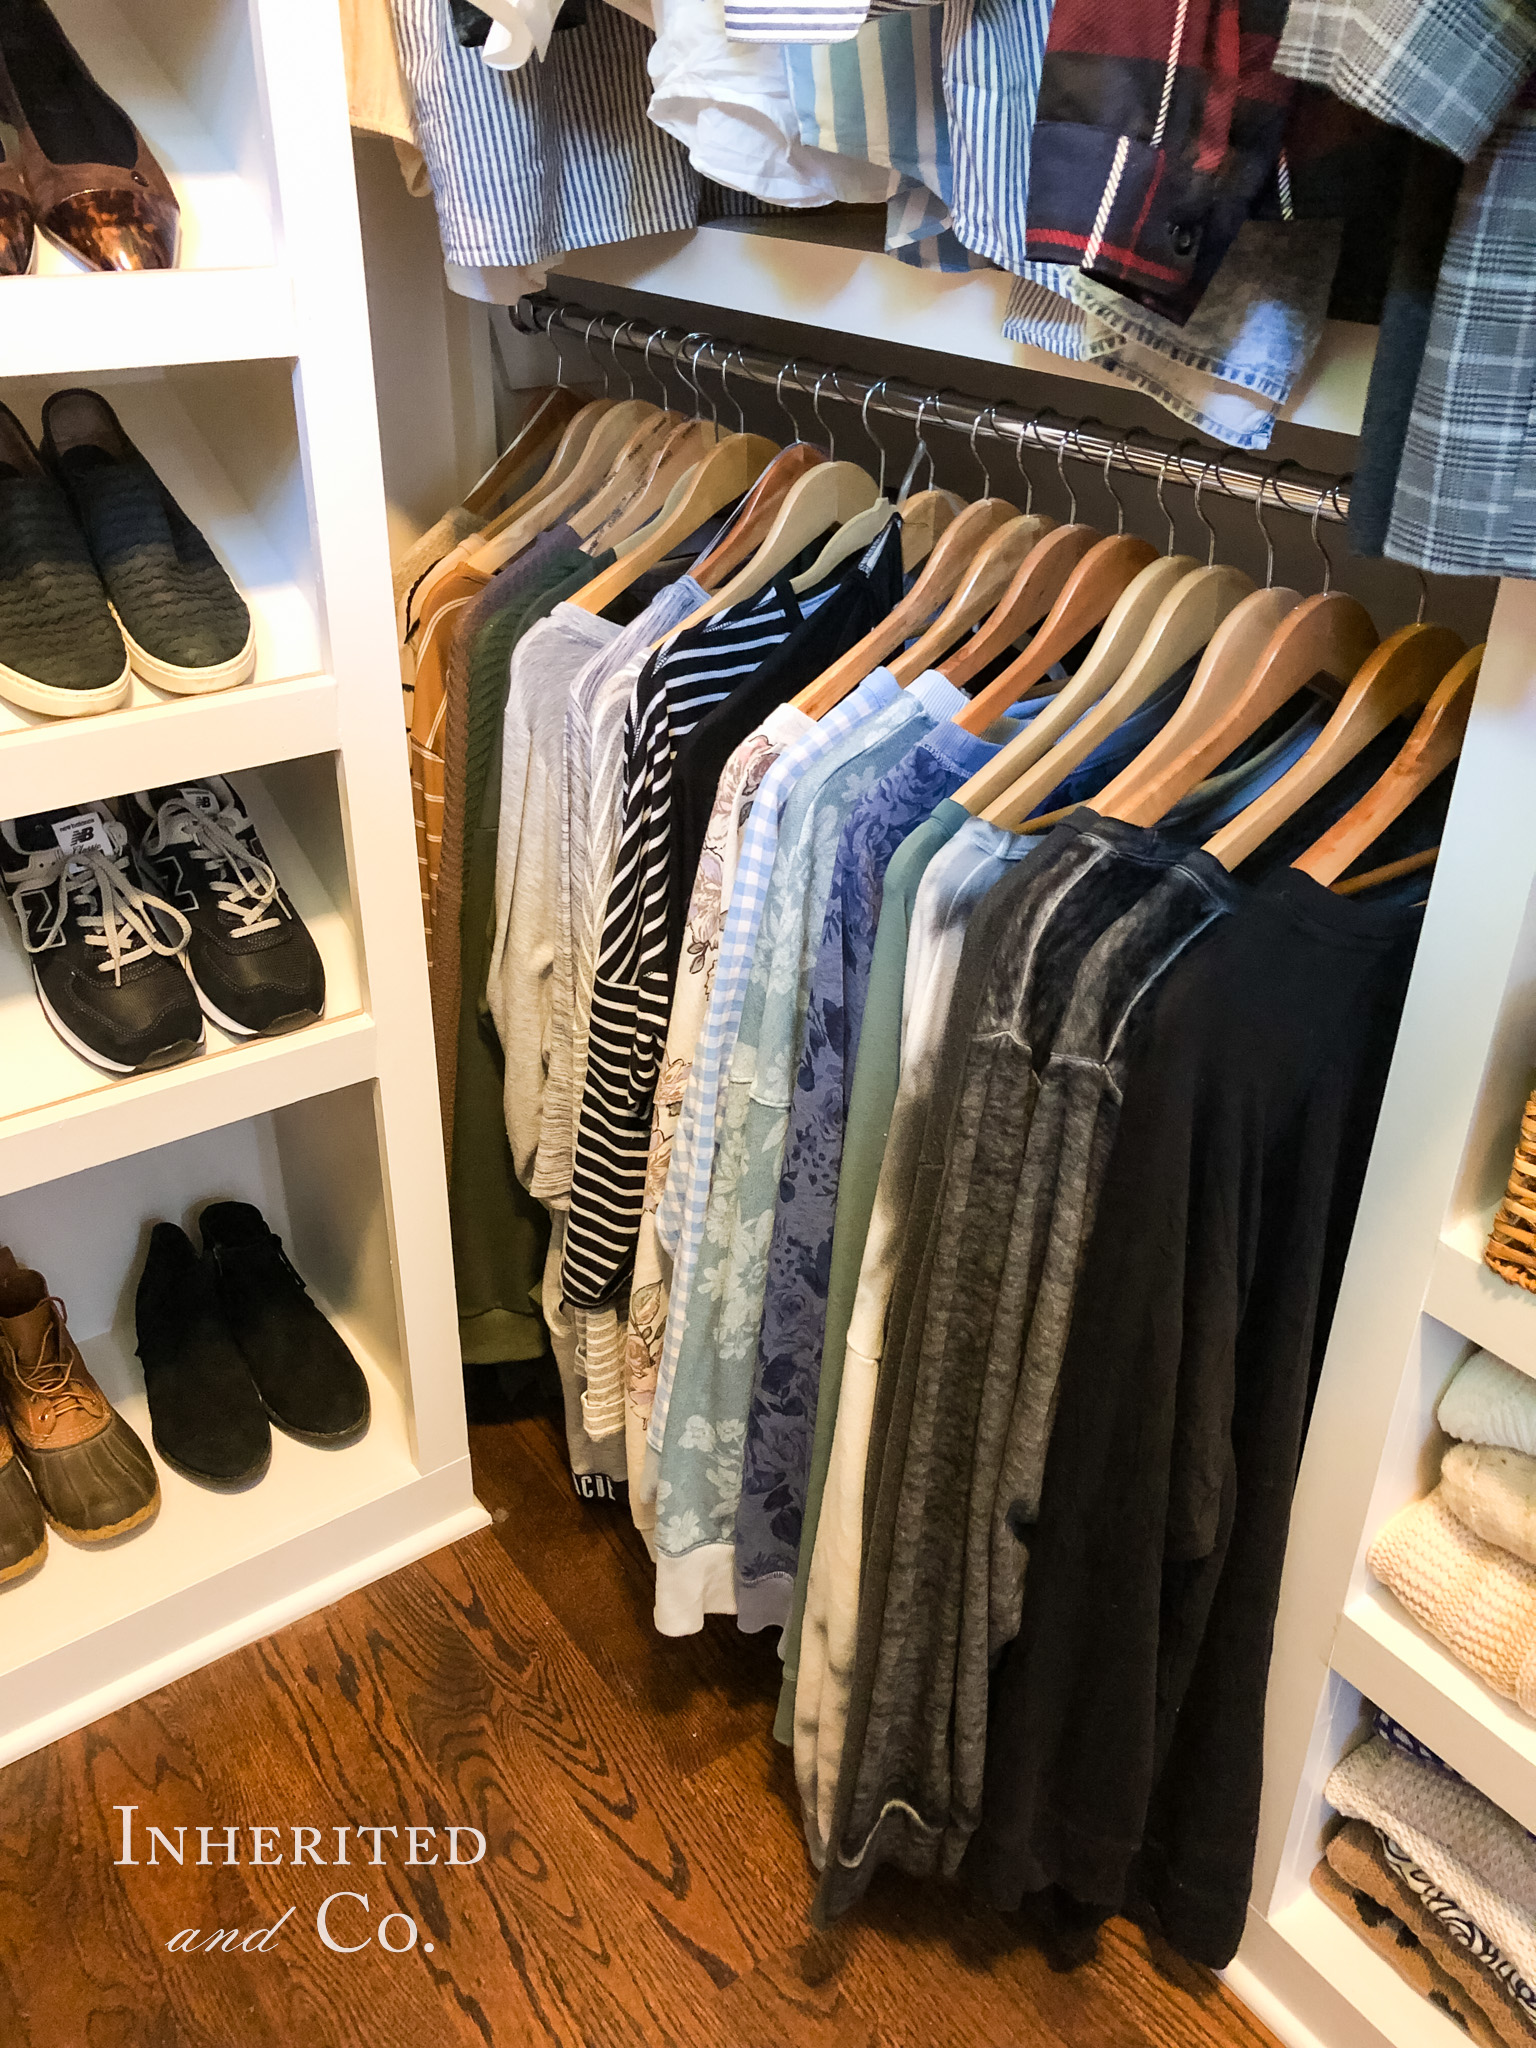 Long sleeve t-shirts and sweatshirts in an organized closet